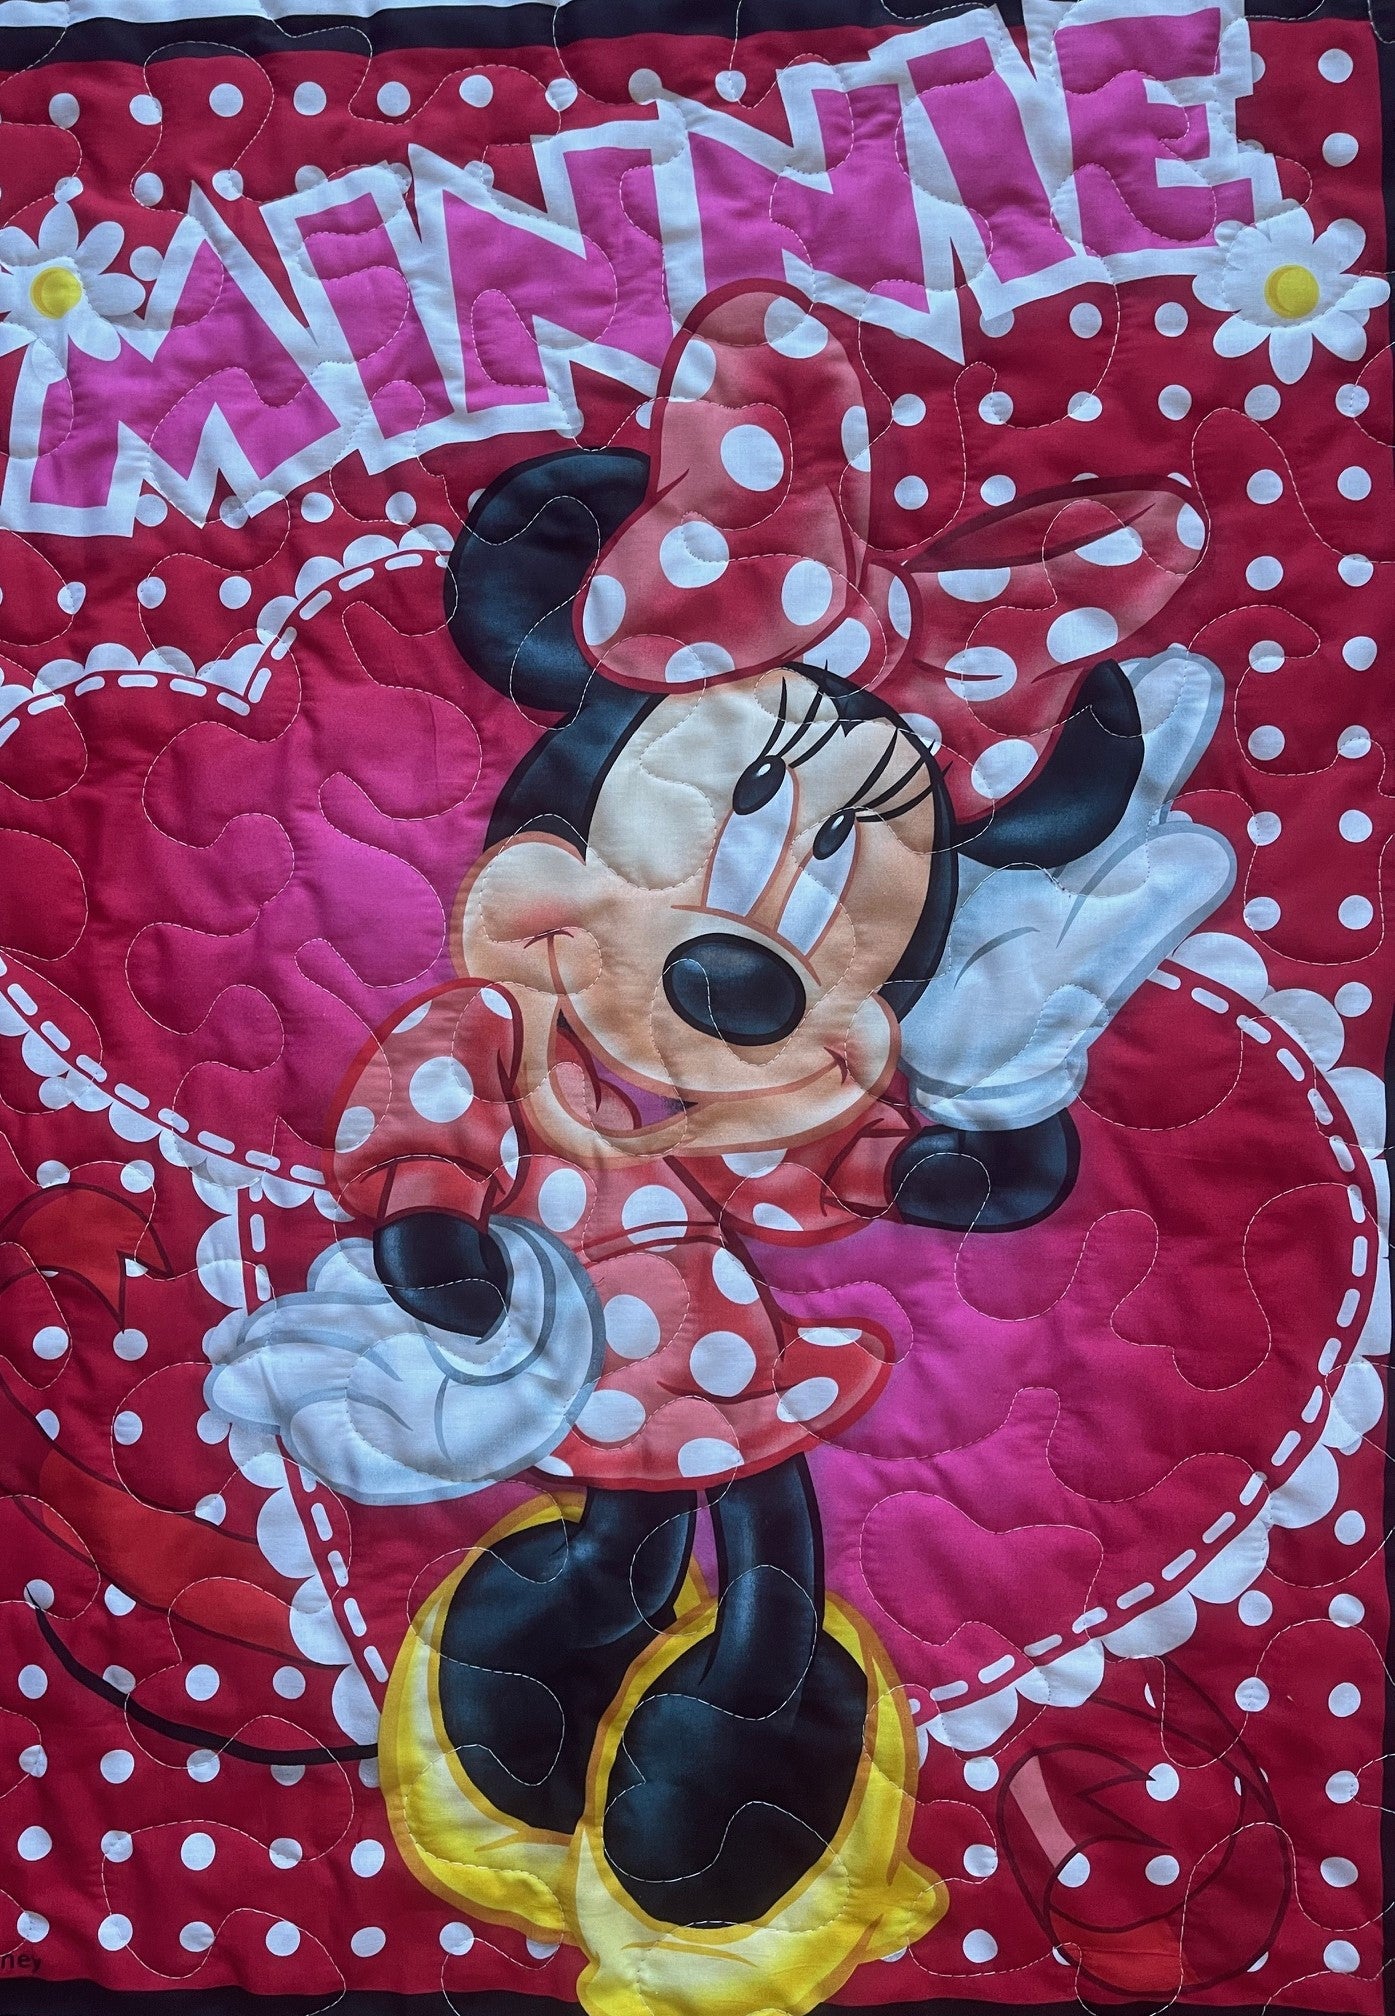 MINNIE MOUSE "LOVE MINNIE HEARTS" Inspired Quilted Blanket with Soft Flannel Backing Fabric